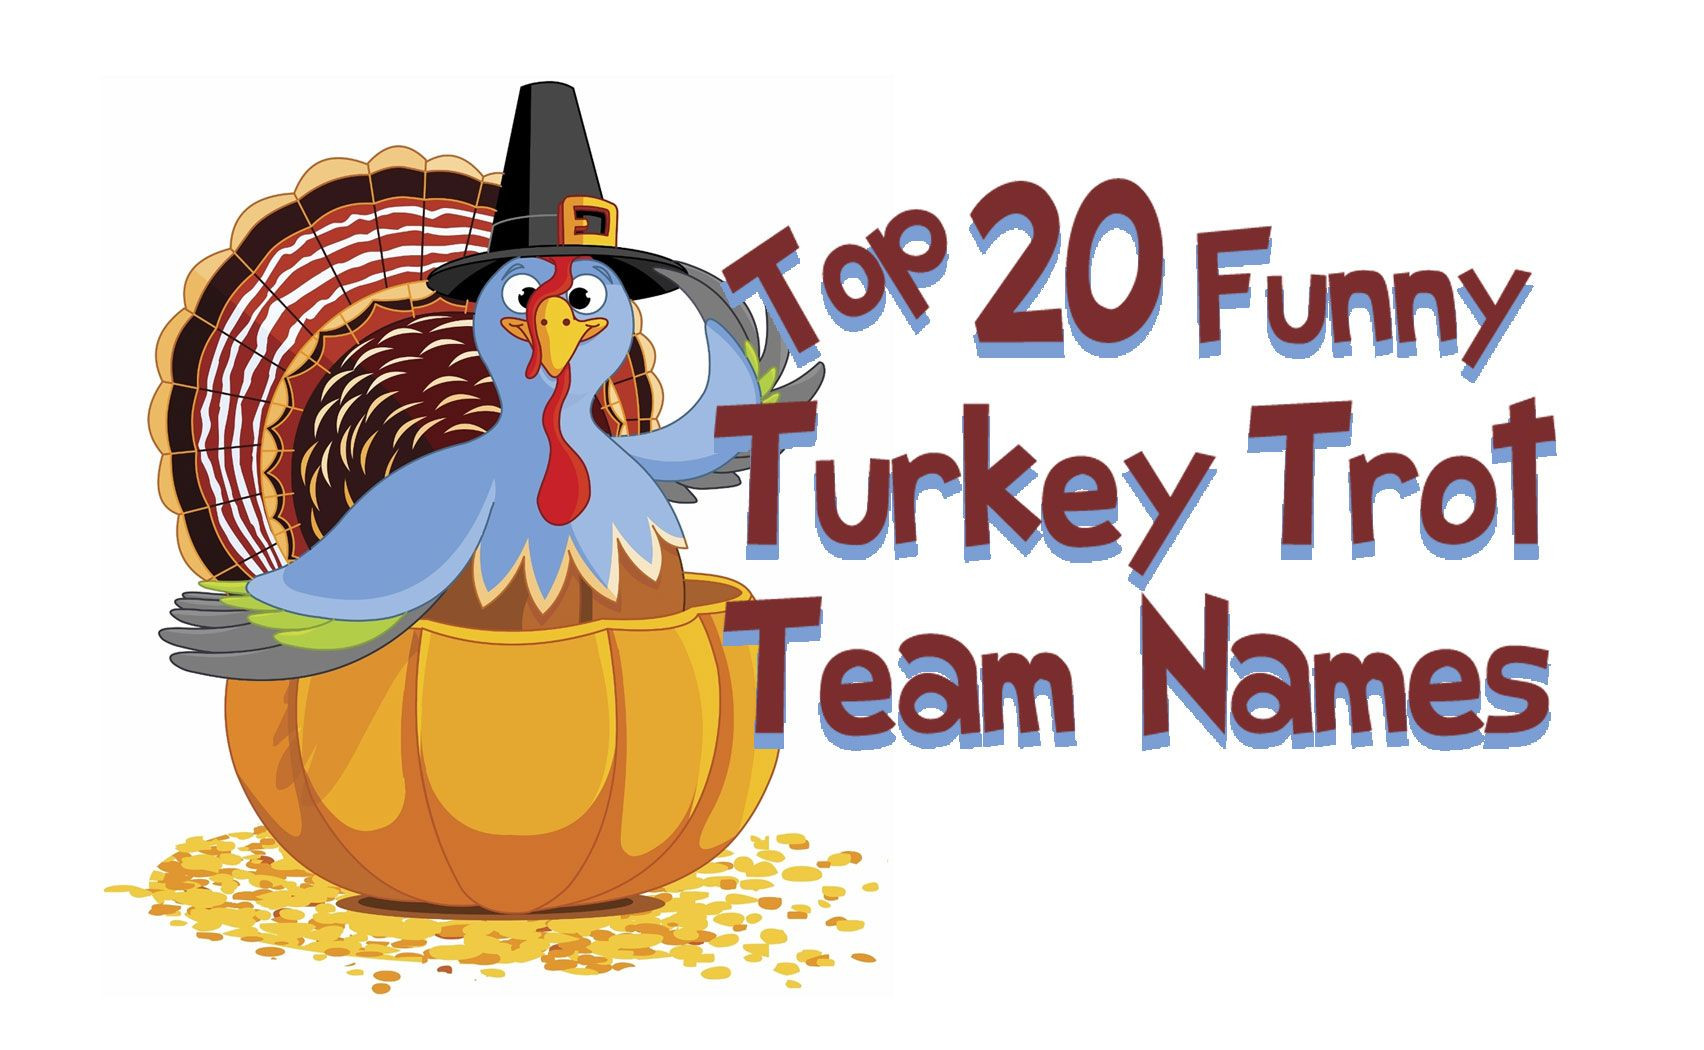 Thanksgiving Turkey Names
 Top 20 Funny Turkey Trot Team Names For Your 5k Race